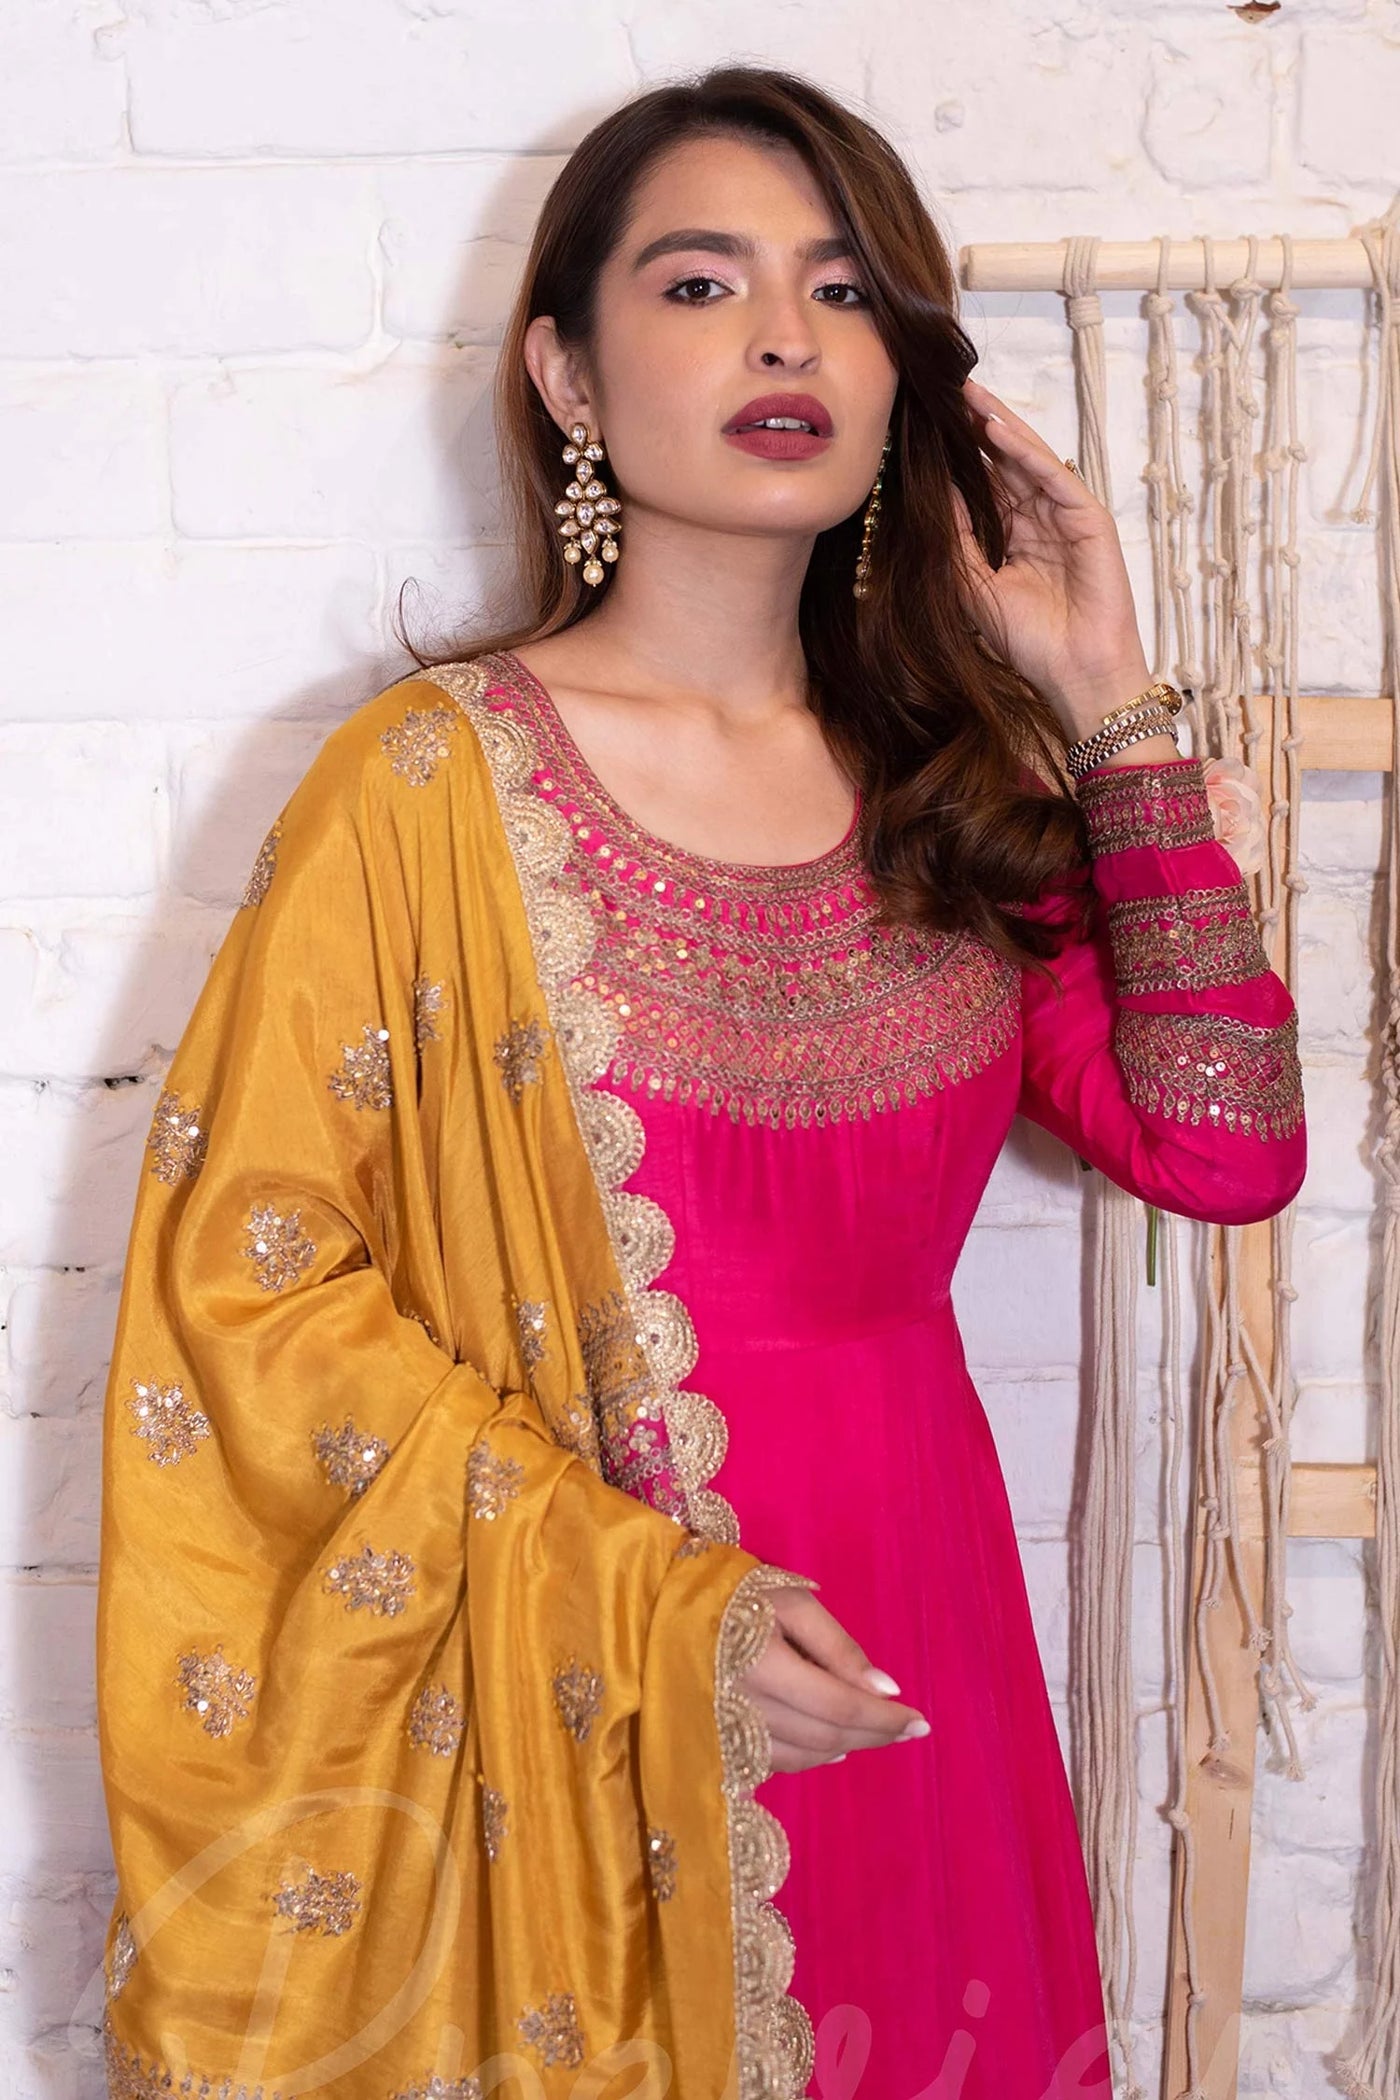 Pink Dori Embroidered Anarkali Indian Clothing in Denver, CO, Aurora, CO, Boulder, CO, Fort Collins, CO, Colorado Springs, CO, Parker, CO, Highlands Ranch, CO, Cherry Creek, CO, Centennial, CO, and Longmont, CO. NATIONWIDE SHIPPING USA- India Fashion X